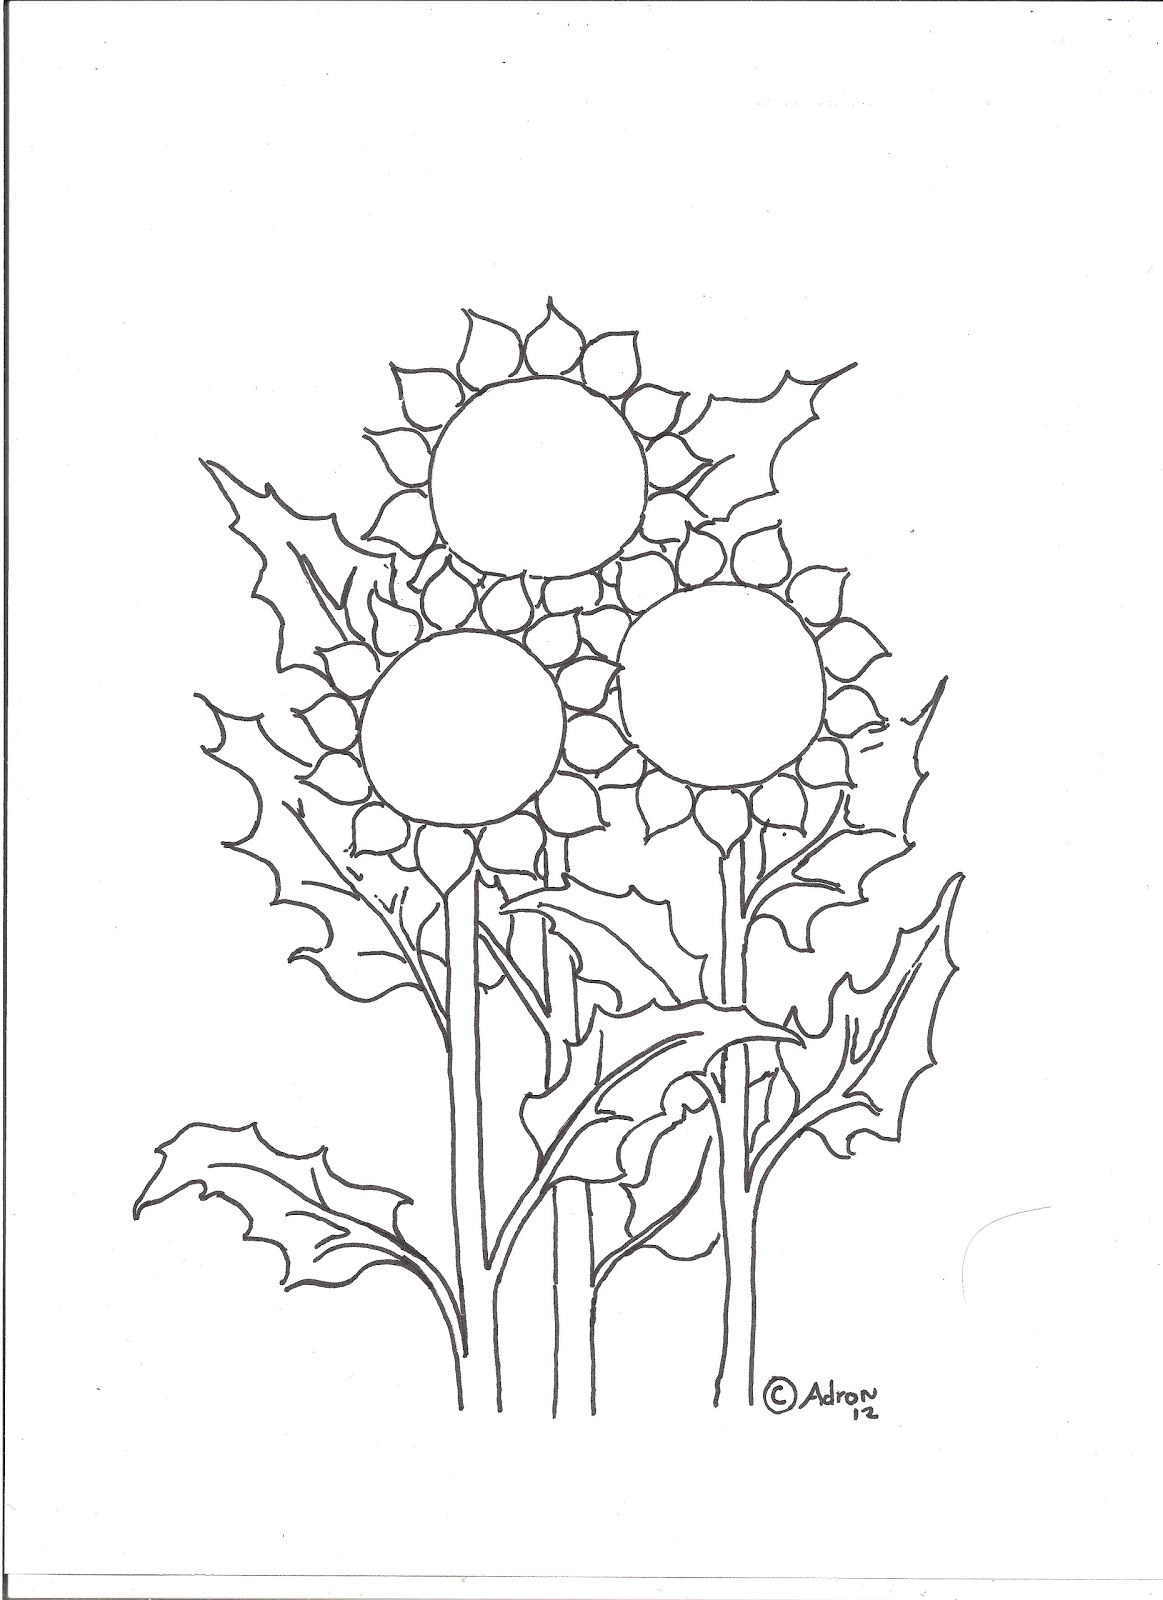 Coloring Pages for Kids by Mr. Adron: Three Sunflowers Coloring Page free.